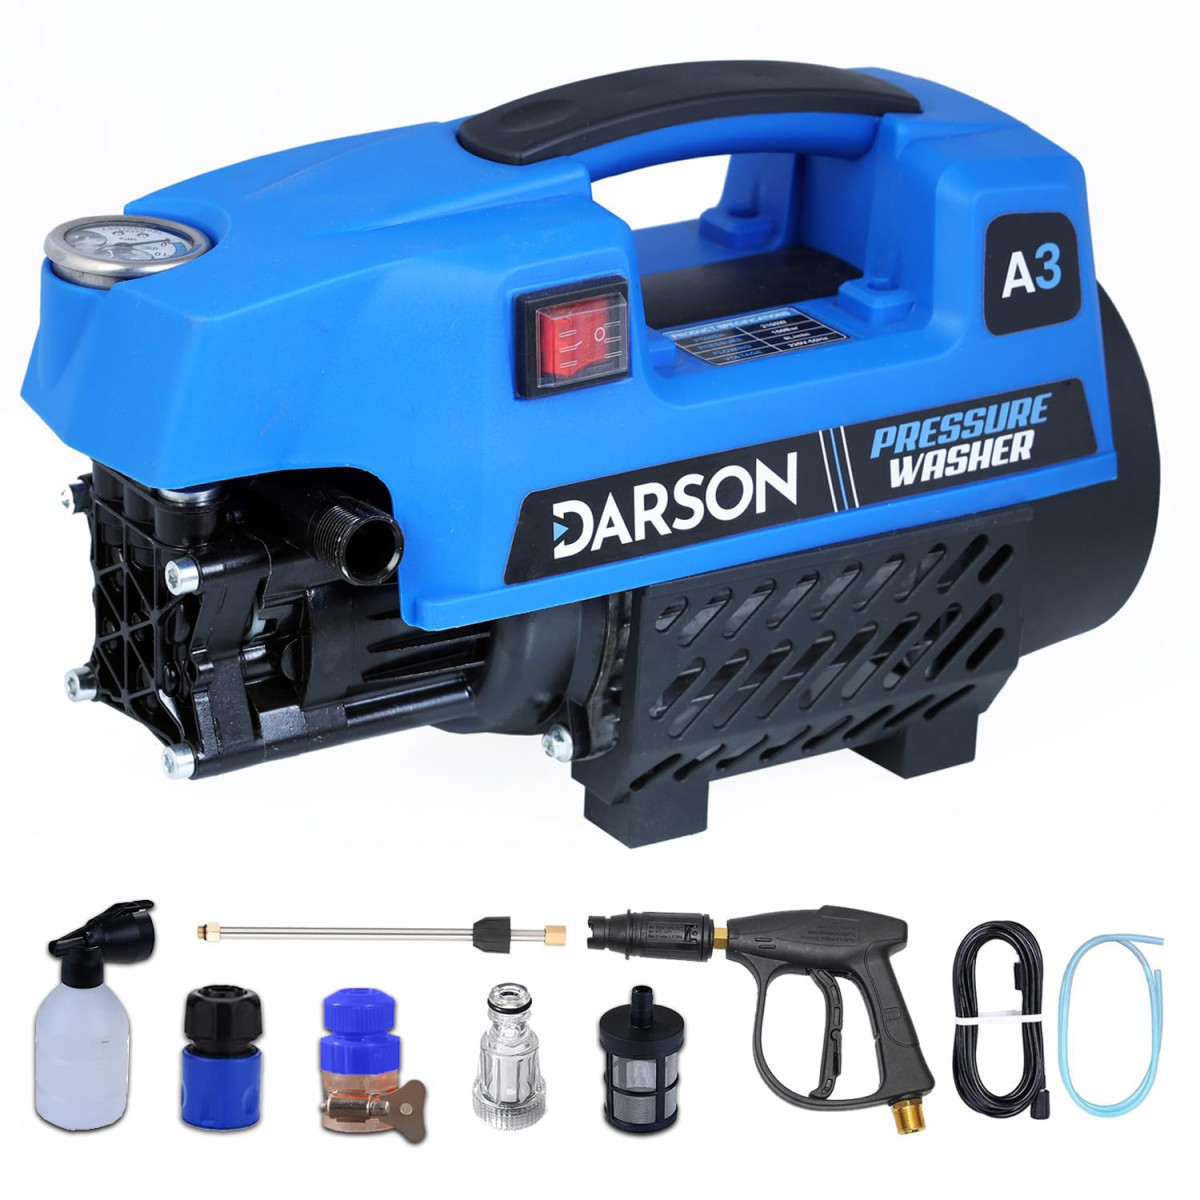 Darson A3 High Pressure Washer Car Washer Machine 2100 Watts 160 Bars 8LMin Flow Rate 8 Meters Outlet Hose Pipe Portable for Car Bike  Home Cleaning